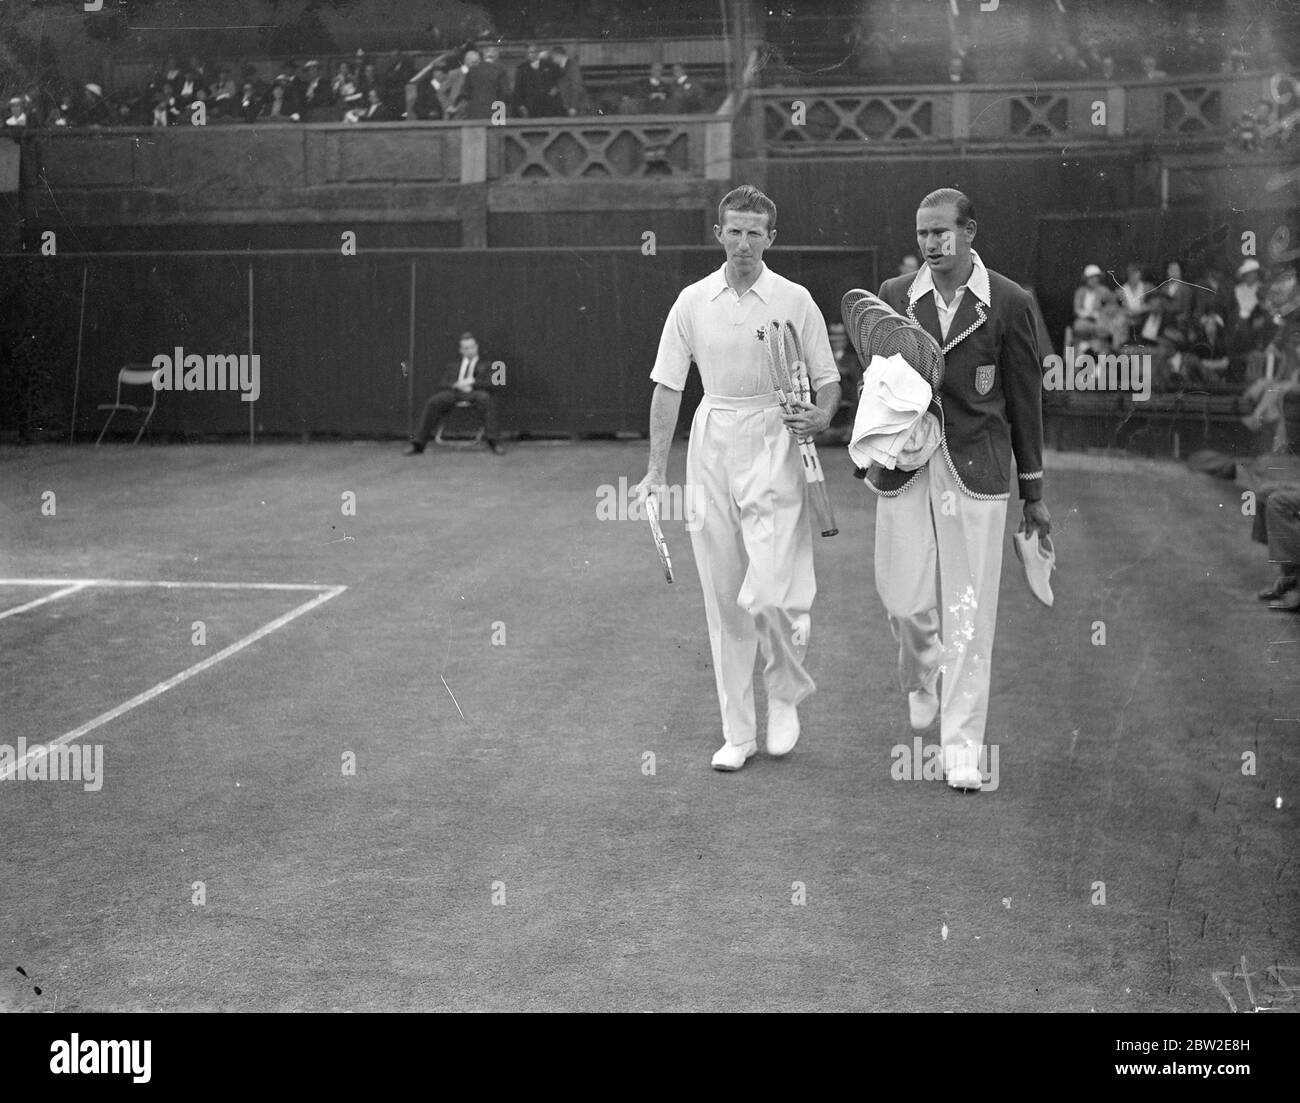 CE Hare of Great Britain and Donald Budge, making their way onto court. Hare beat Budge to become Wimbledon champion winning 13-15 in their singles match in the Davis cup challenge round at Wimbledon. 24 July 1937 Stock Photo